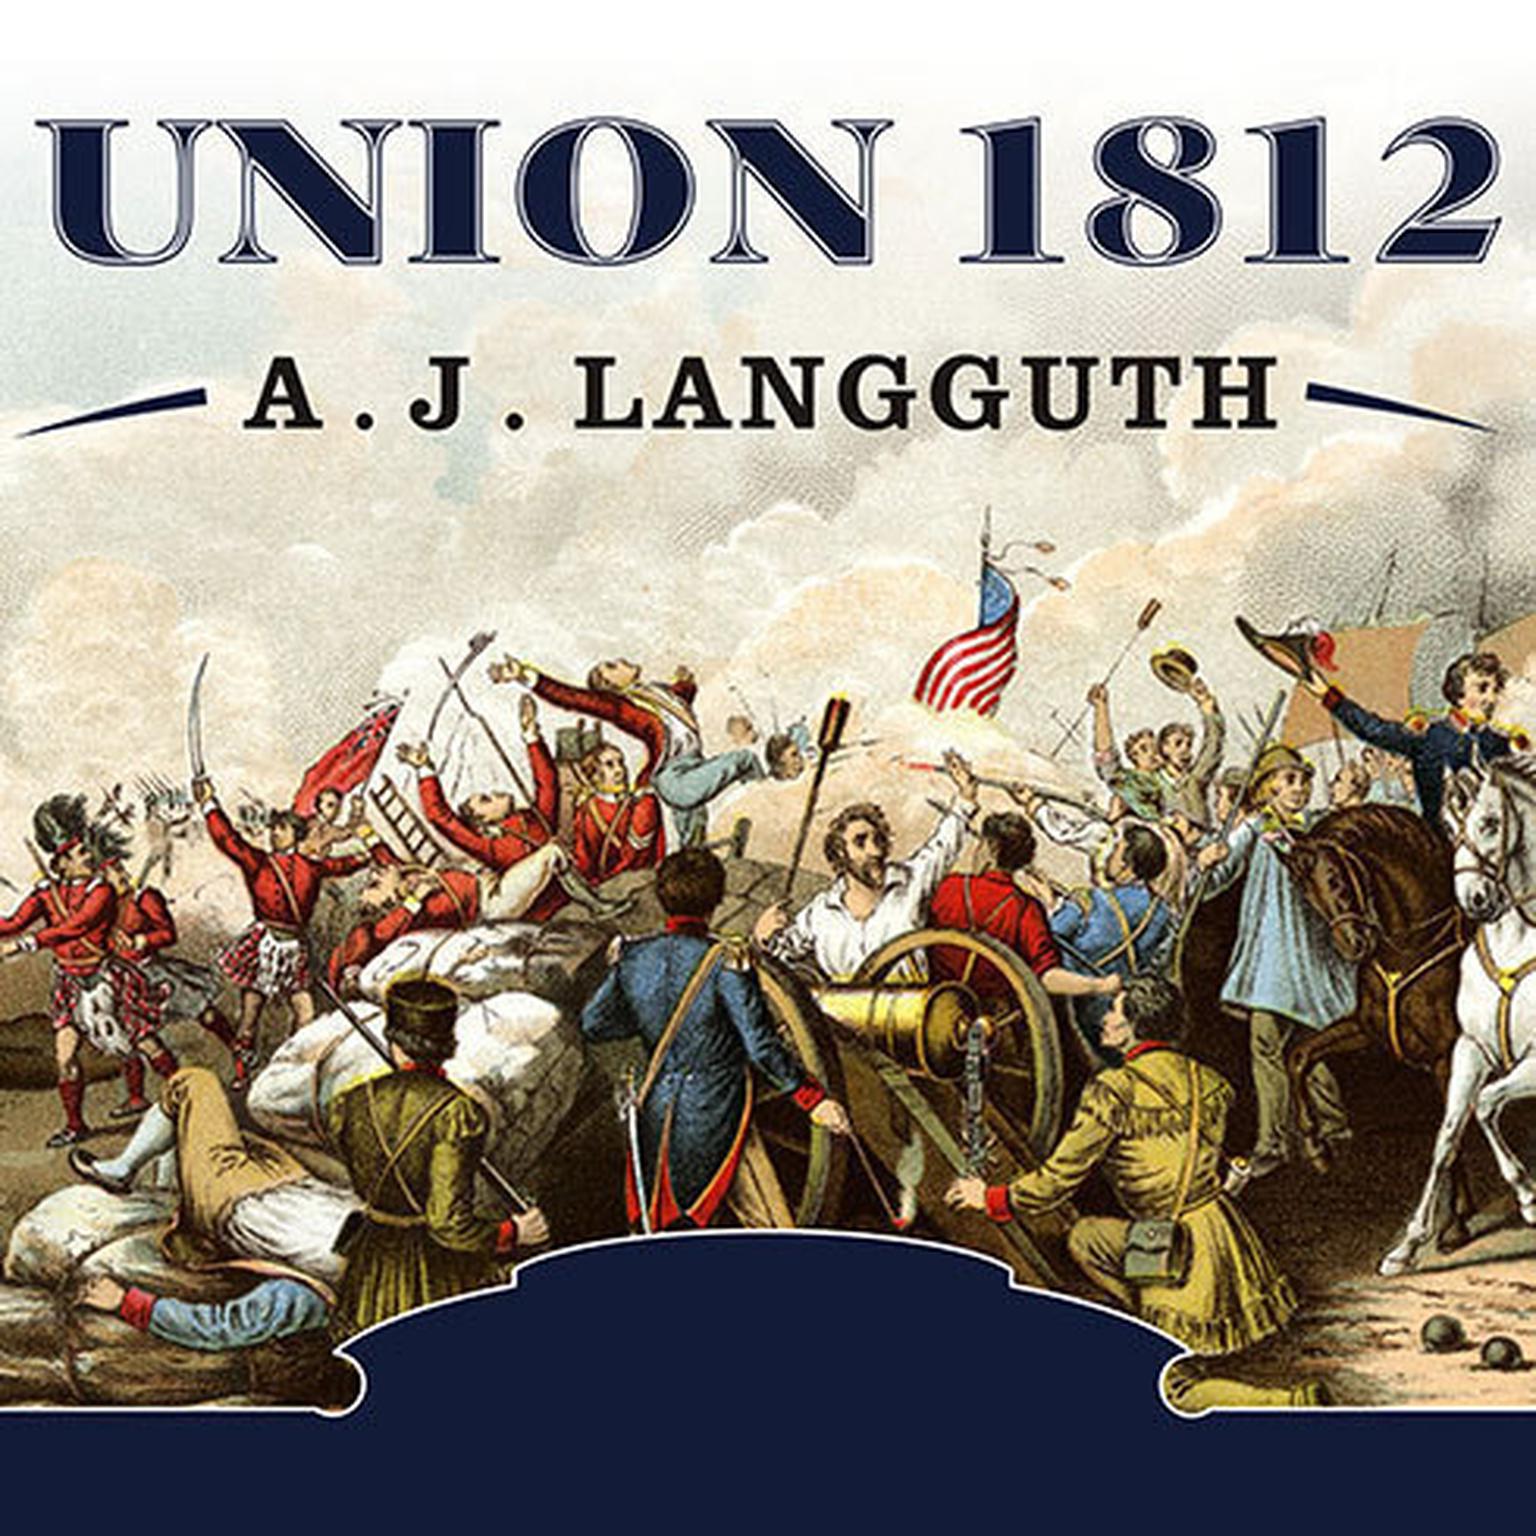 Union 1812: The Americans Who Fought the Second War of Independence Audiobook, by A. J. Langguth